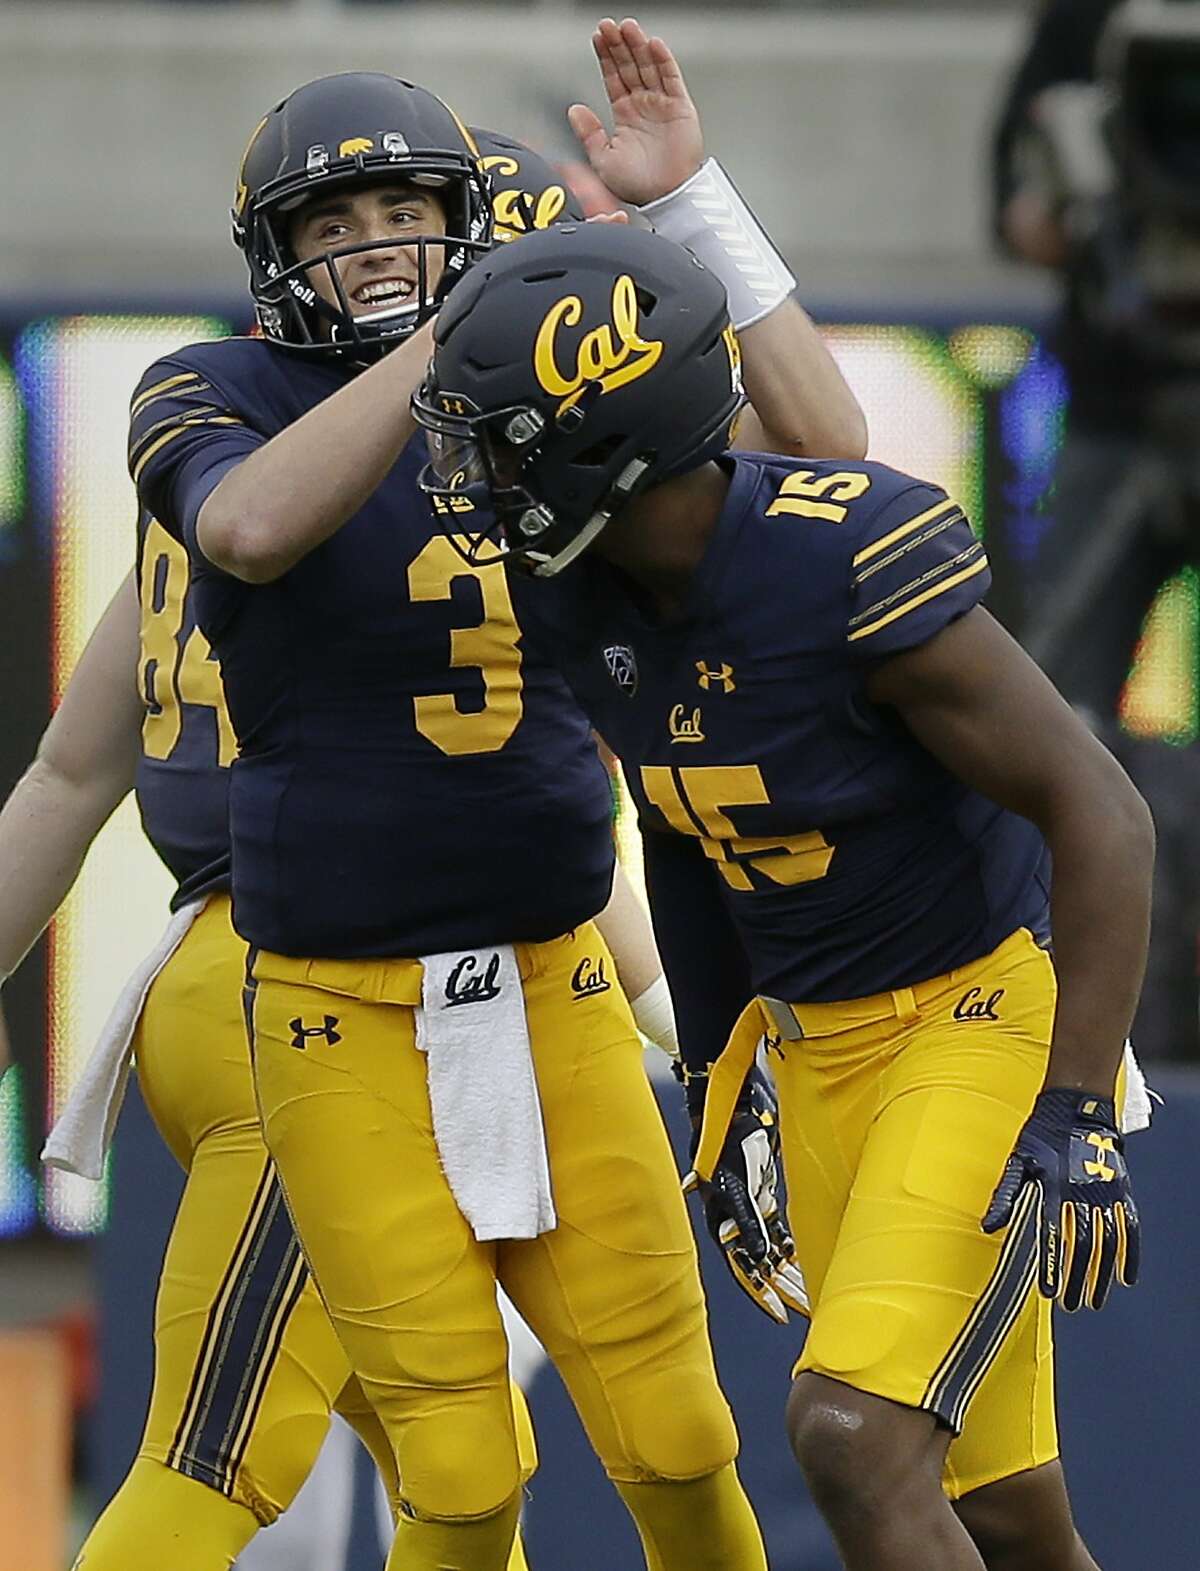 California quarterback Ross Bowers (3) celebrates a touchdown reception by Jordan Veasy, right, during the second half of an NCAA college football game against Oregon State Saturday, Nov. 4, 2017, in Berkeley, Calif. (AP Photo/Ben Margot)